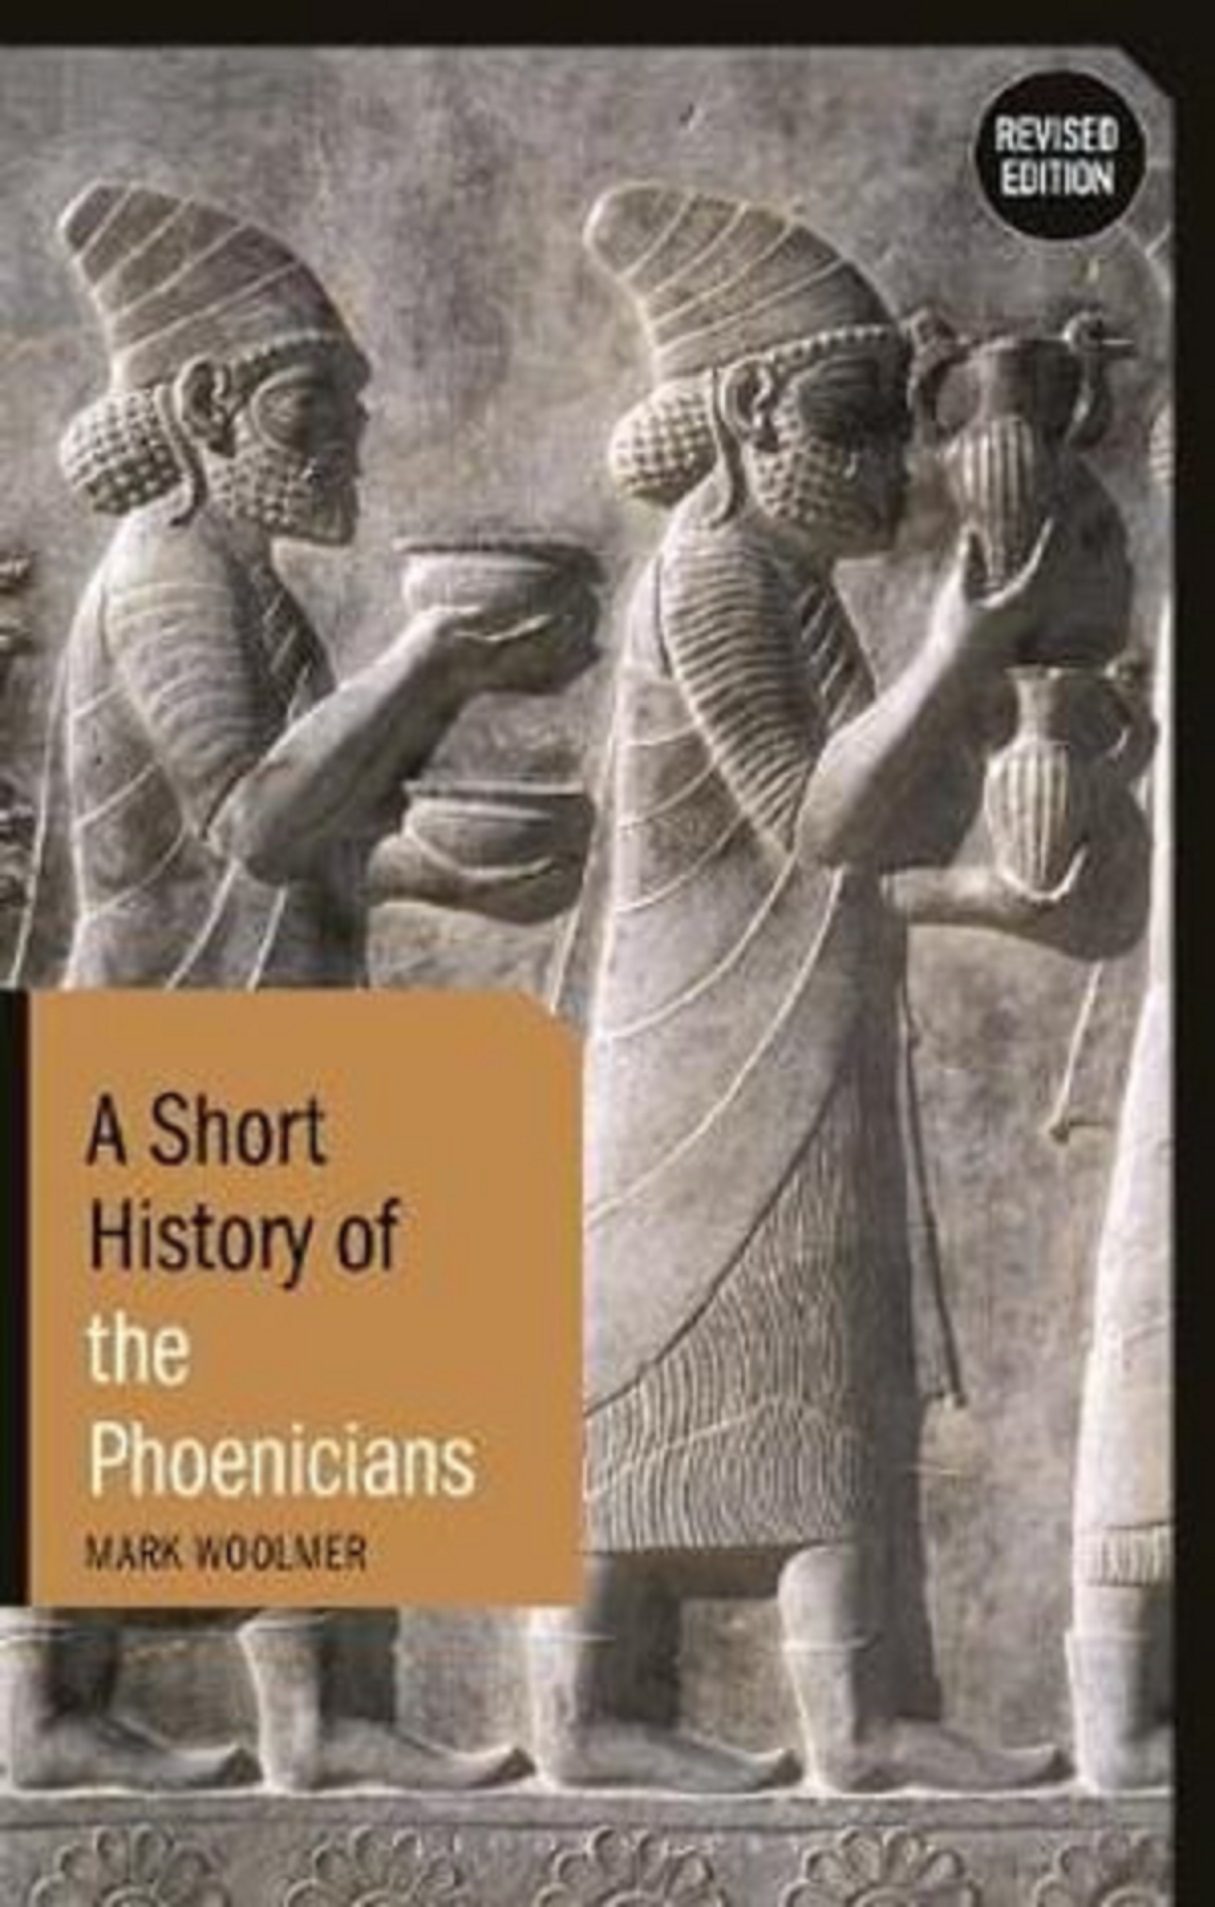 A Short History of the Phoenicians | Mark Woolmer image18